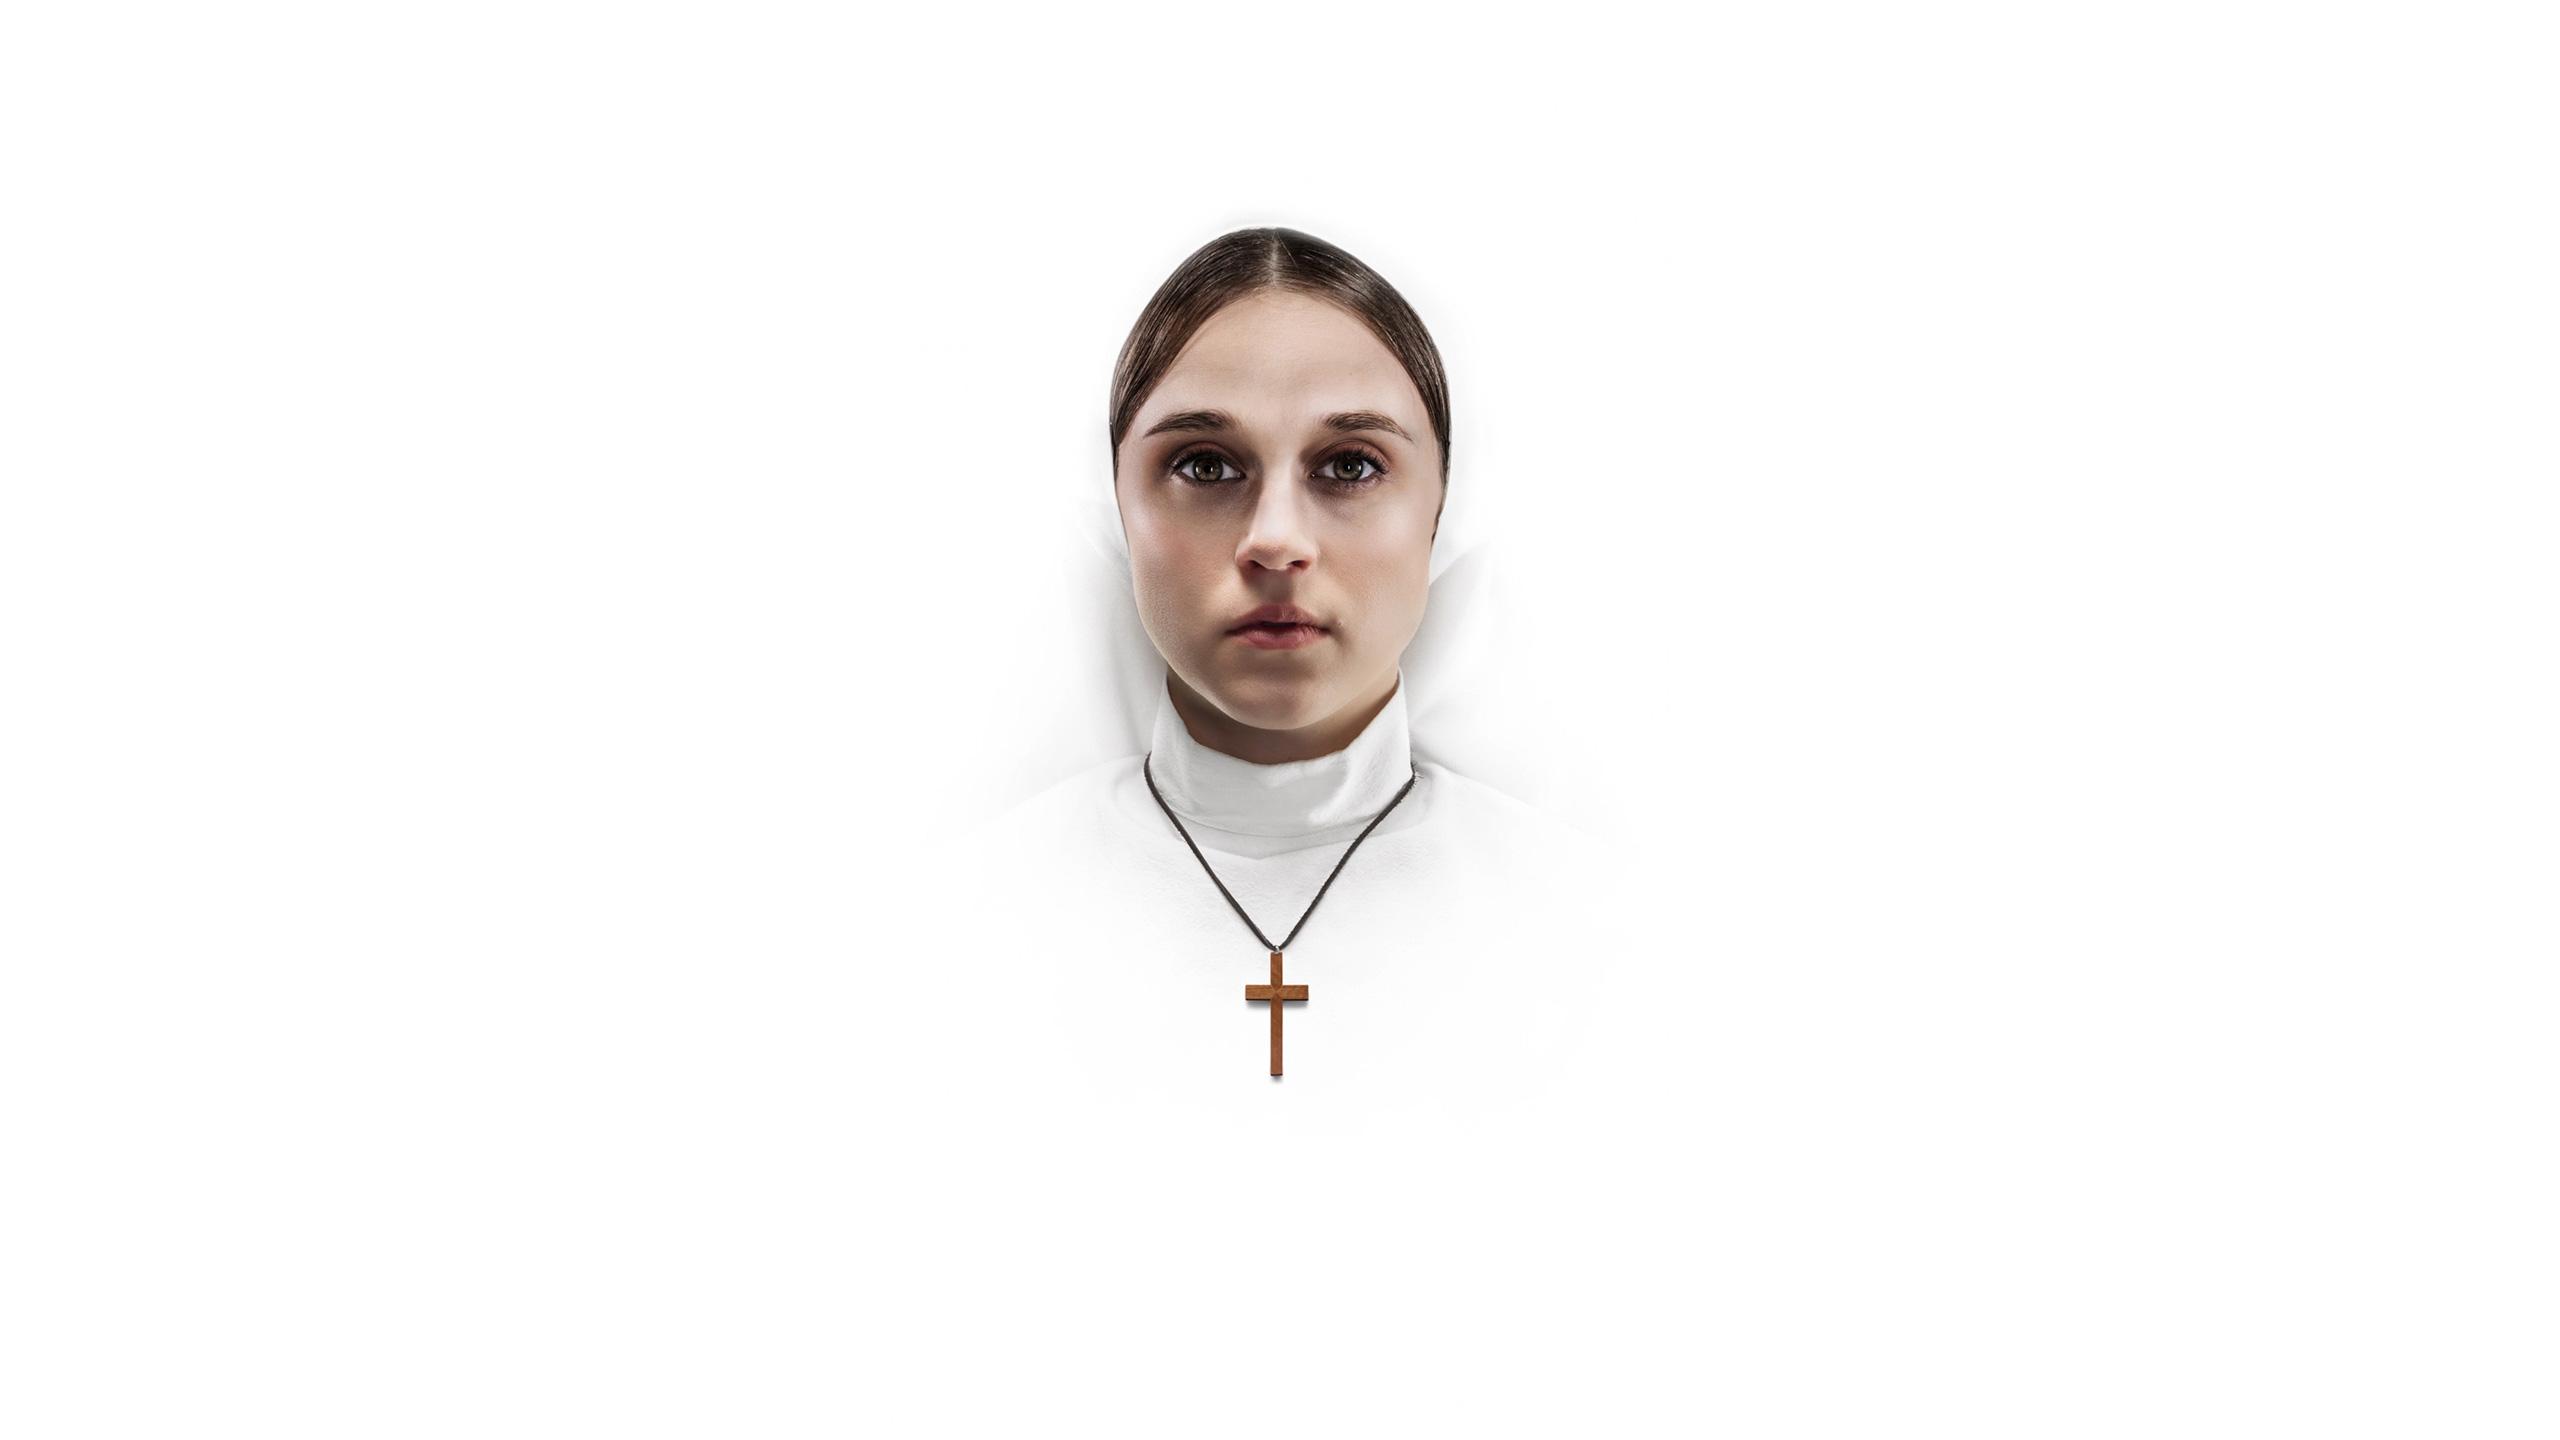 HD wallpaper, The Nun Movie Key Art, Movies Wallpapers, 2018 Movies Wallpapers, Art Wallpapers, Hd Wallpapers, Taissa Farmiga Wallpapers, The Nun Wallpapers, Poster Wallpapers